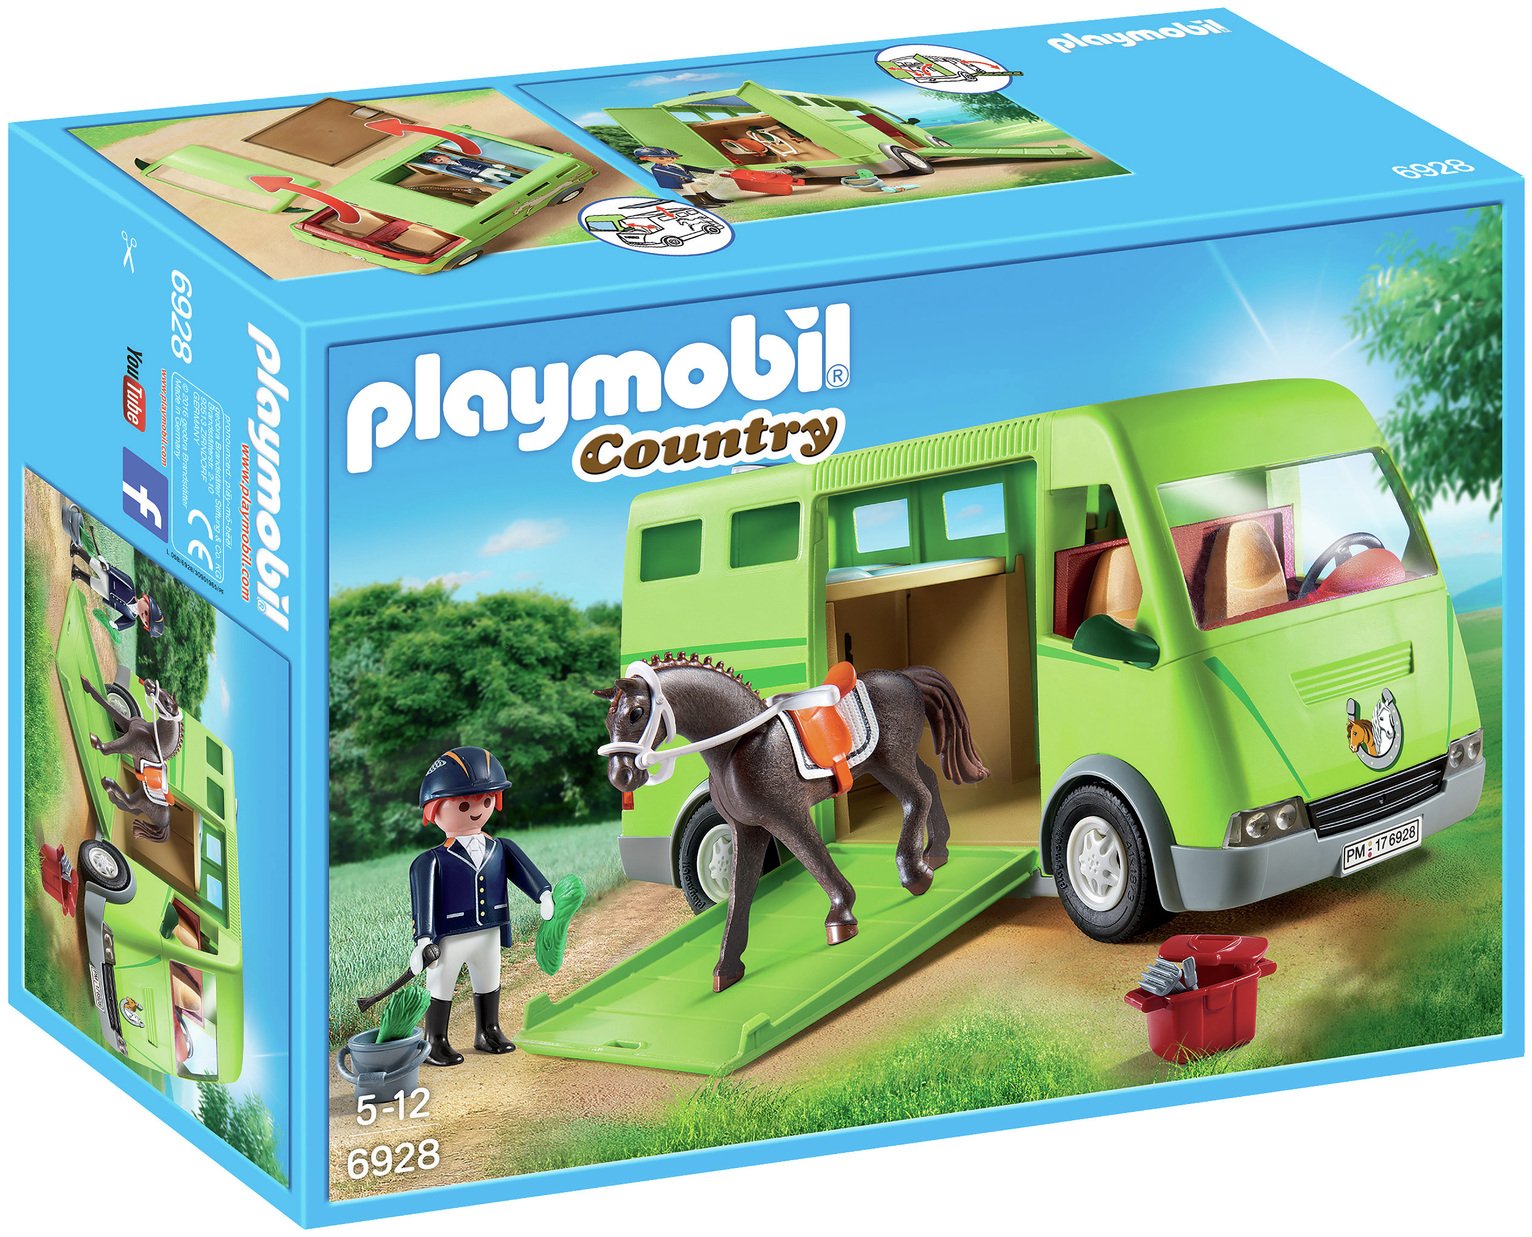 Playmobil 6928 Country Horse Box Opening Side